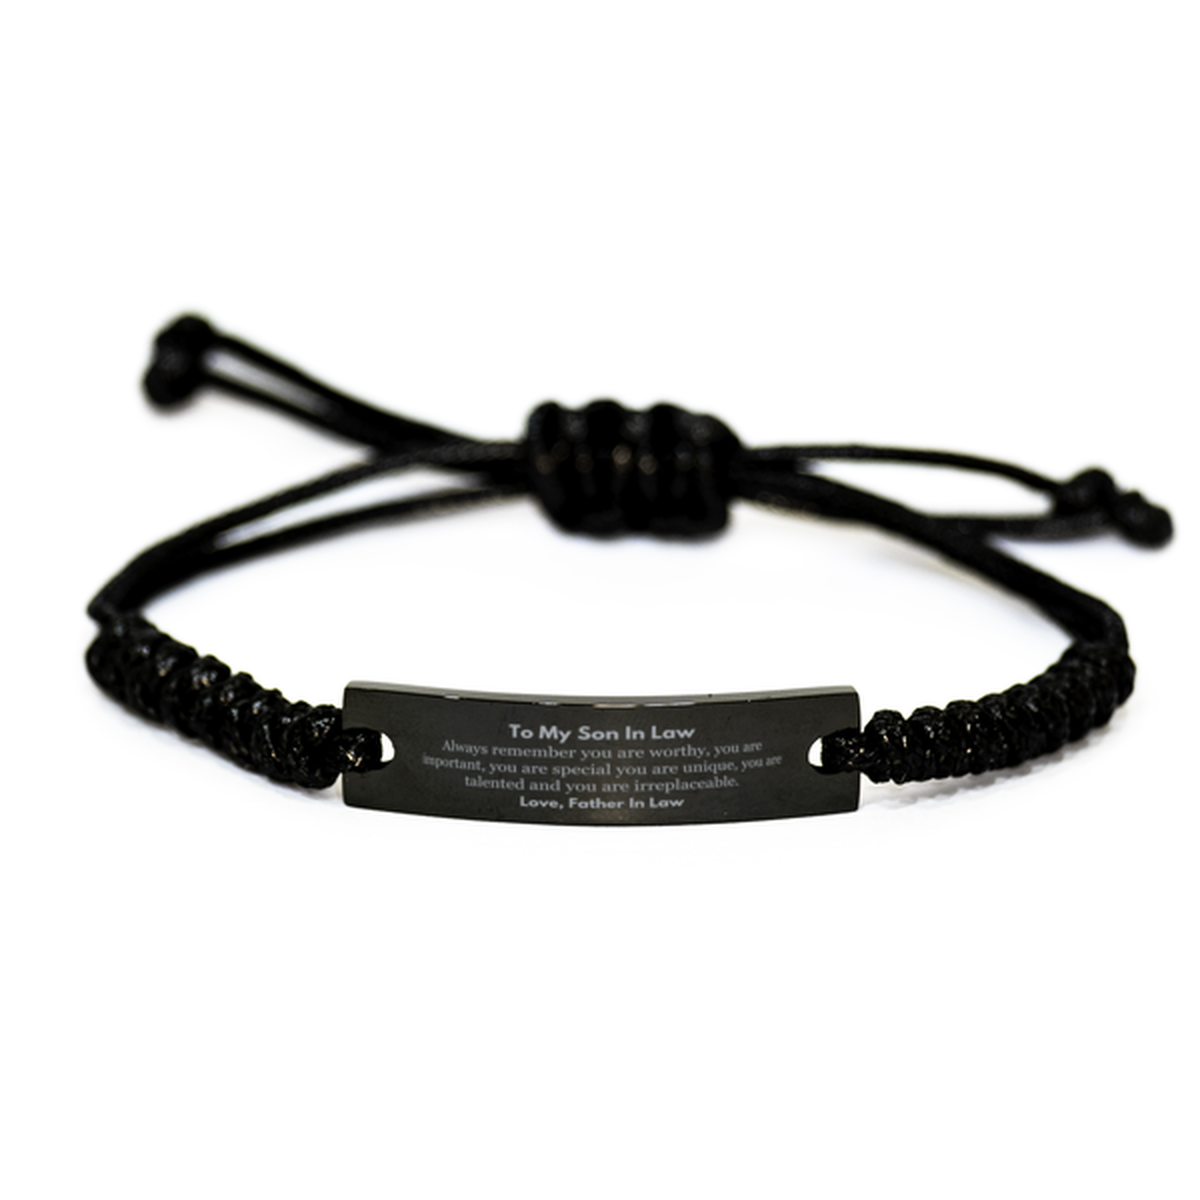 Son In Law Birthday Gifts from Father In Law, Inspirational Black Rope Bracelet for Son In Law Christmas Graduation Gifts for Son In Law Always remember you are worthy, you are important. Love, Father In Law